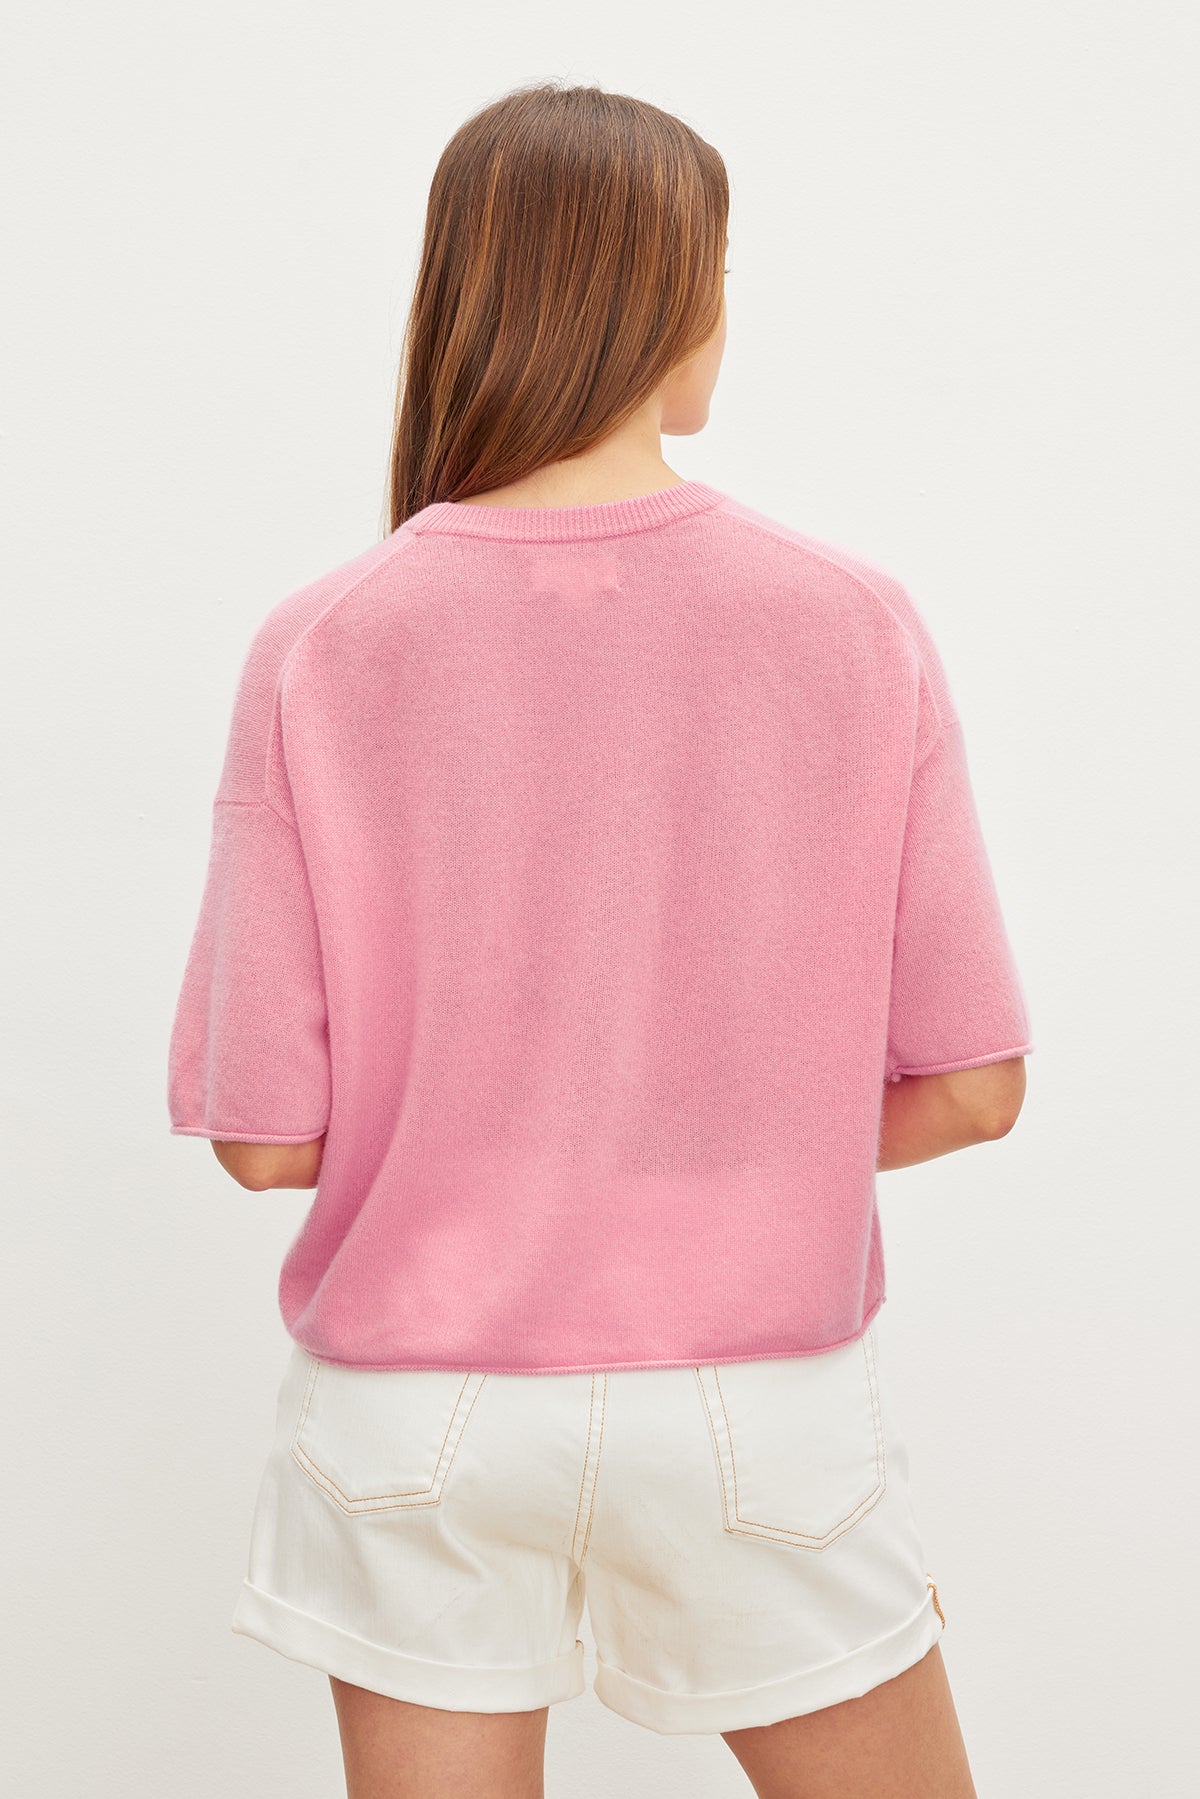 The back view of a woman wearing a Velvet by Graham & Spencer BLAKE CASHMERE CREW NECK SWEATER and white shorts with a versatile and cropped silhouette.-35955485343937